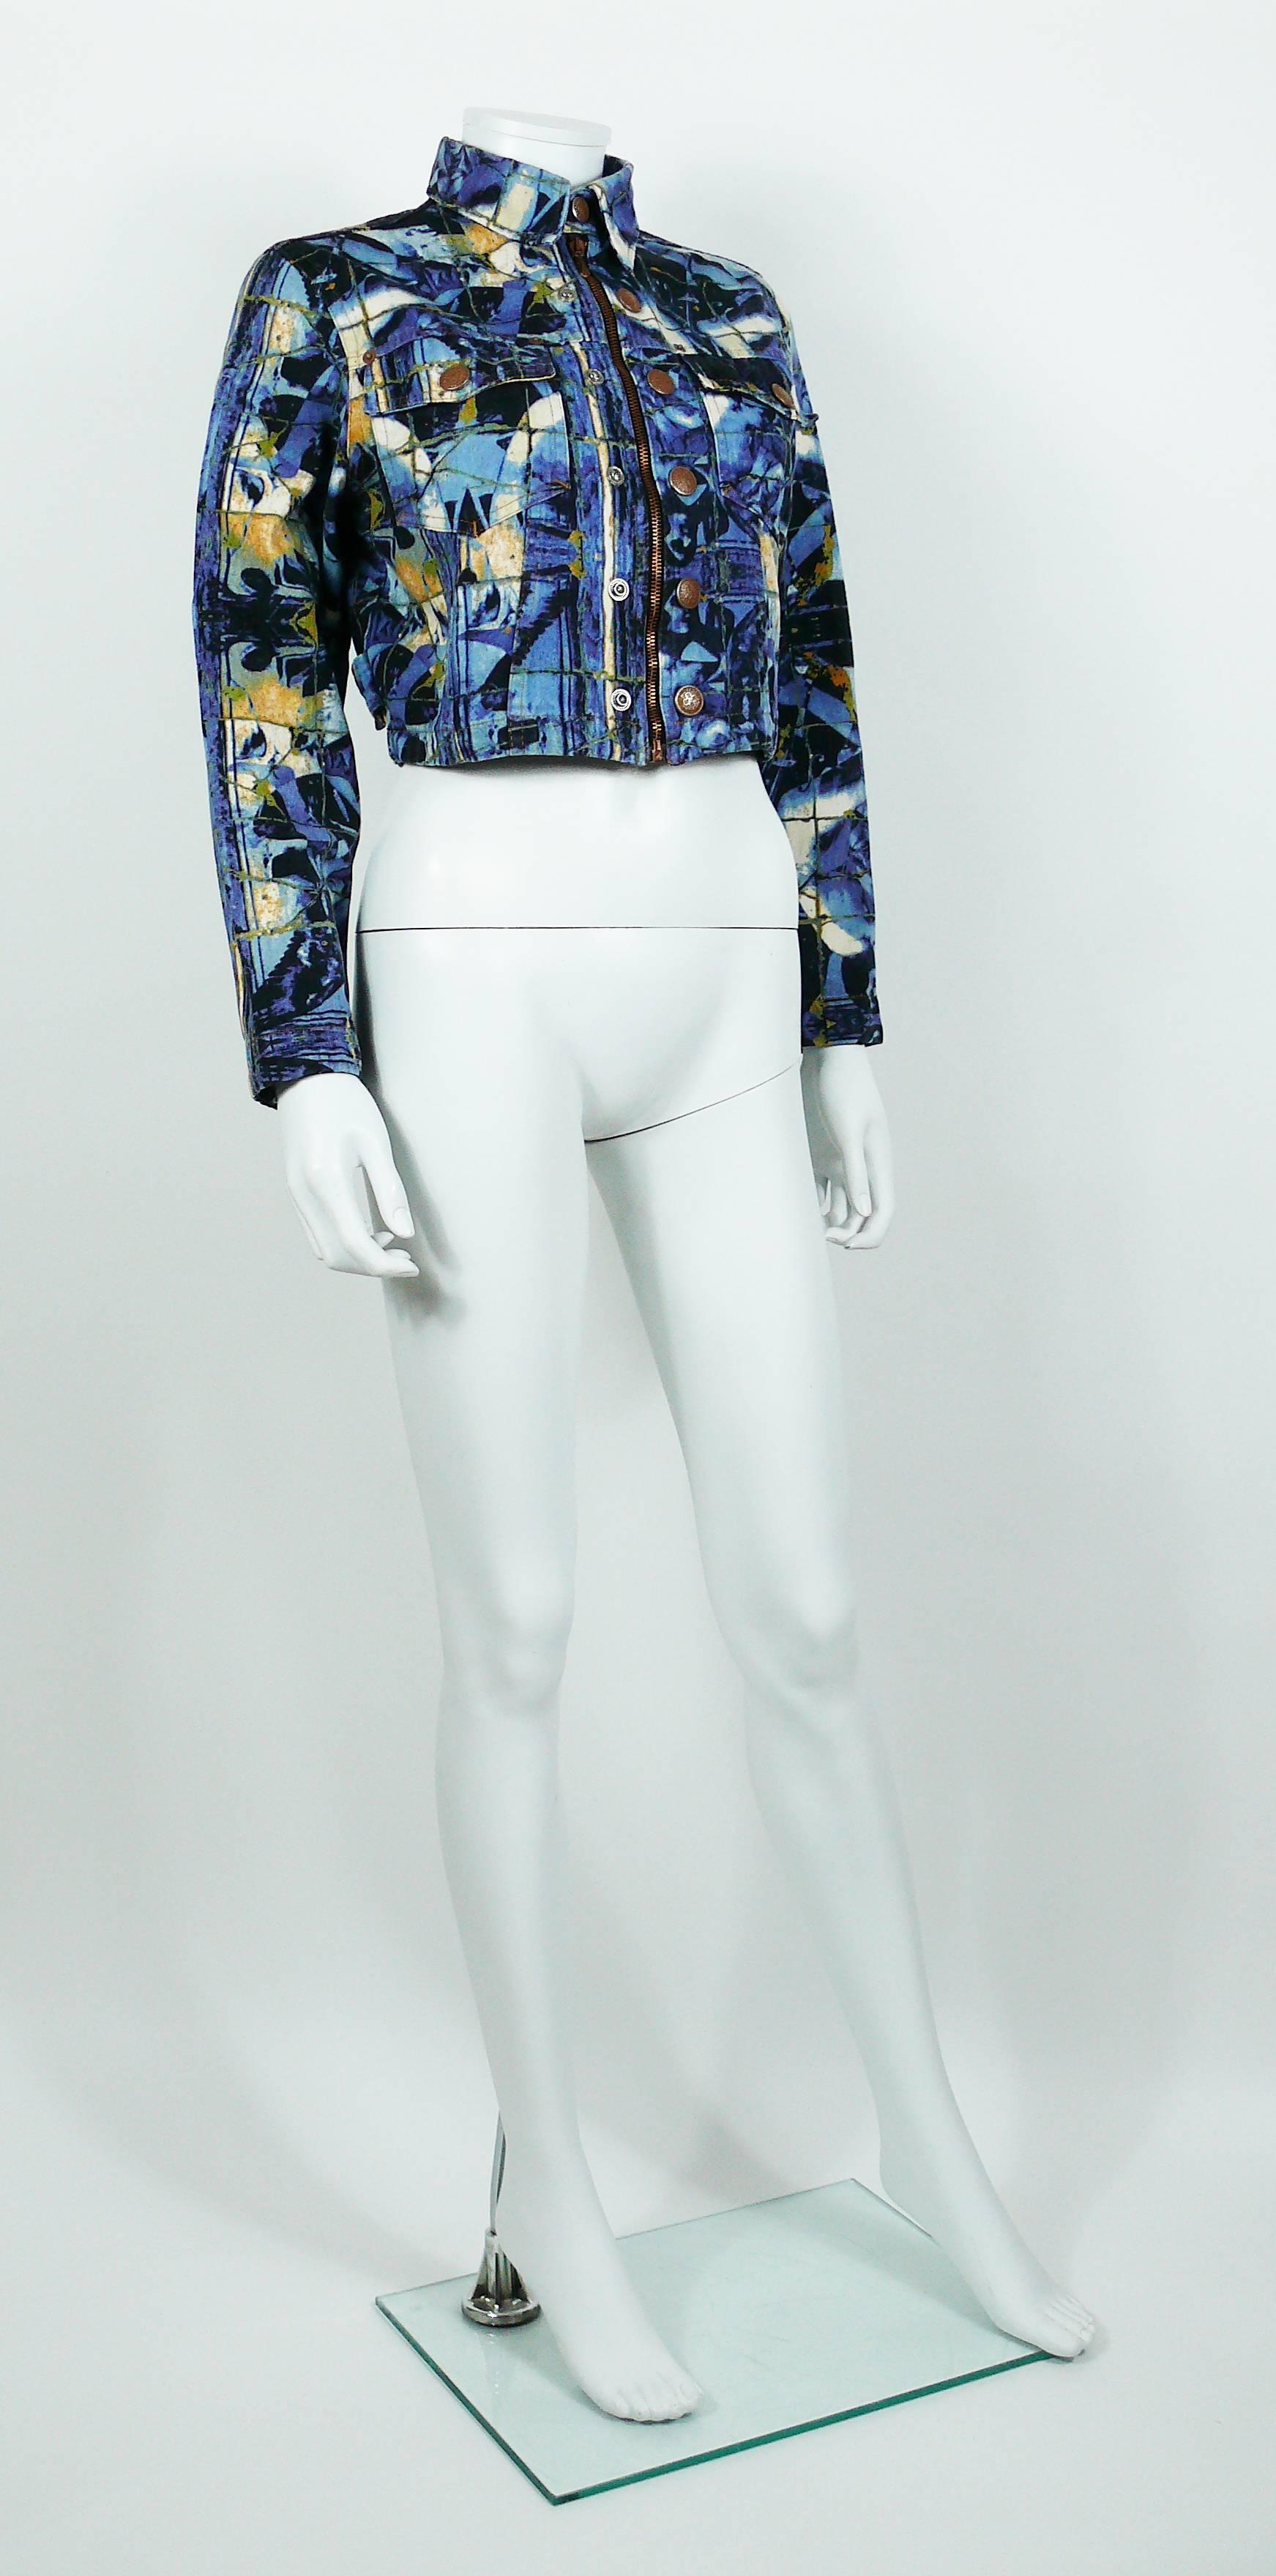 JEAN PAUL GAULTIER gorgeous vintage cropped jacket featuring a blue shades mosaic print with winged women.

This jacket features :
- Long sleeves.
- Two front pockets.
- 2-way front closure system, either with snap buttons or with zip (as shown on